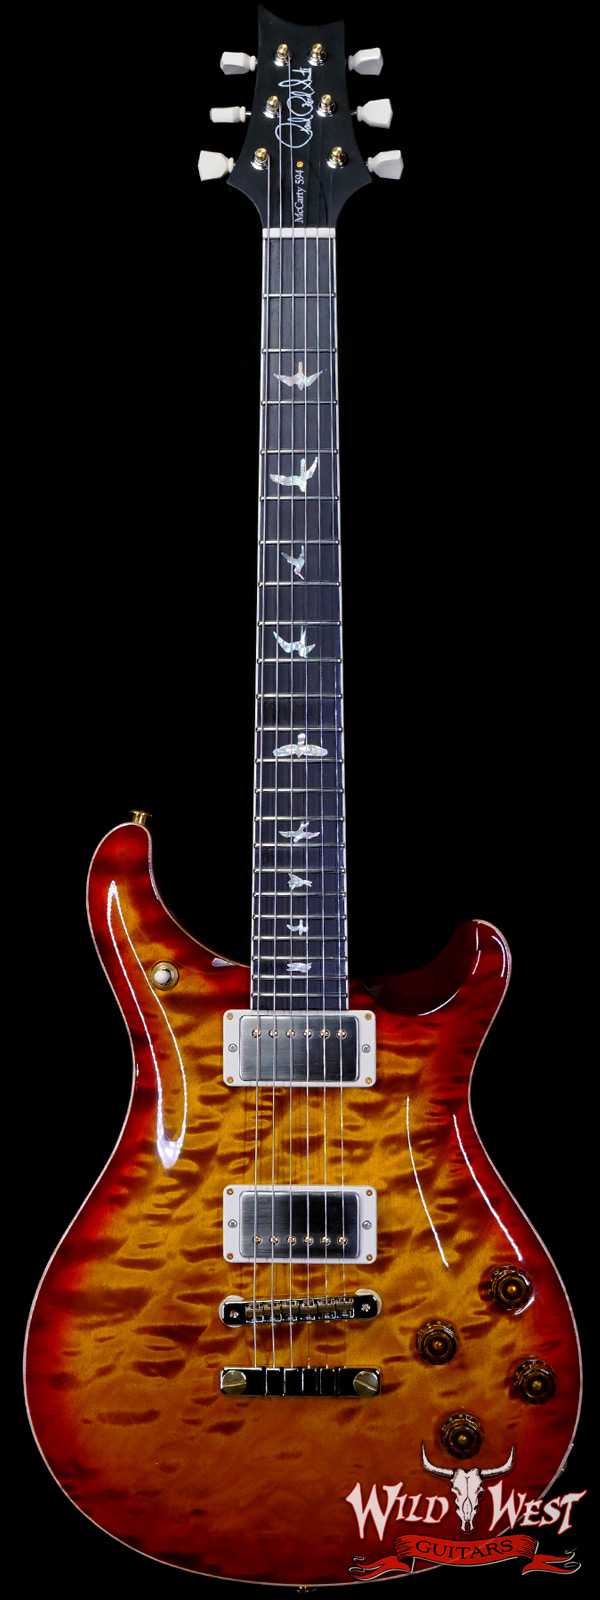 Paul Reed Smith PRS Core 10 Top McCarty 594 1-Piece Quilt Maple Top Stained Flame Maple Neck Top Ebony Board Dark Cherry Sunburst